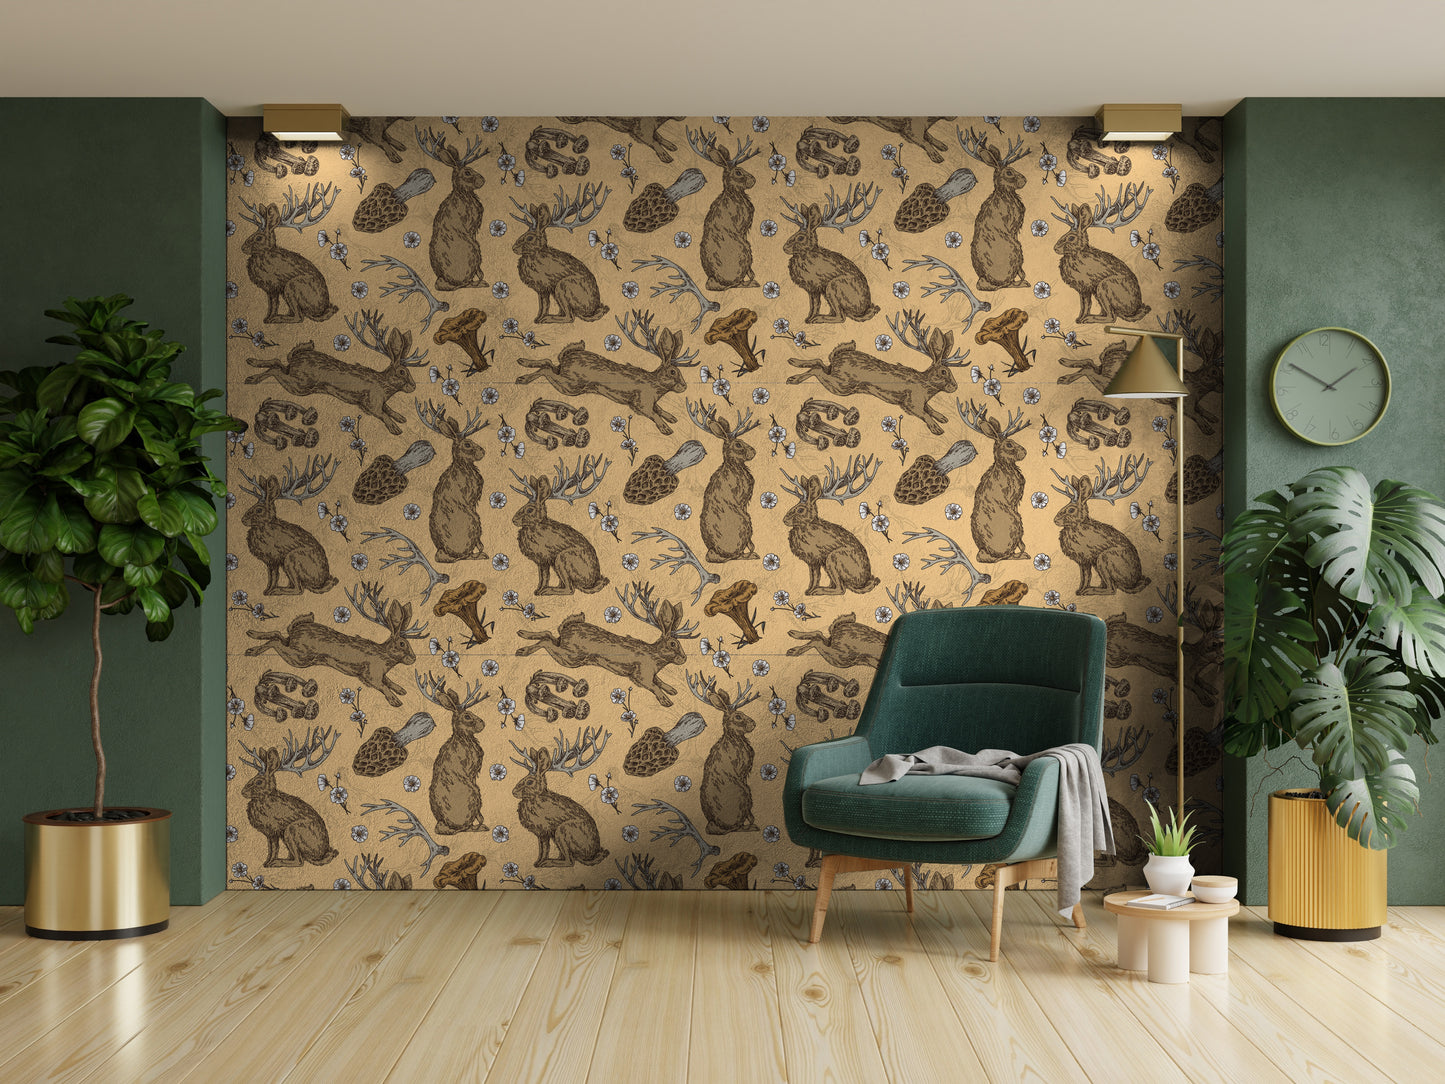 Jackalope And Mushroom Removable Peel And Stick Wallpaper